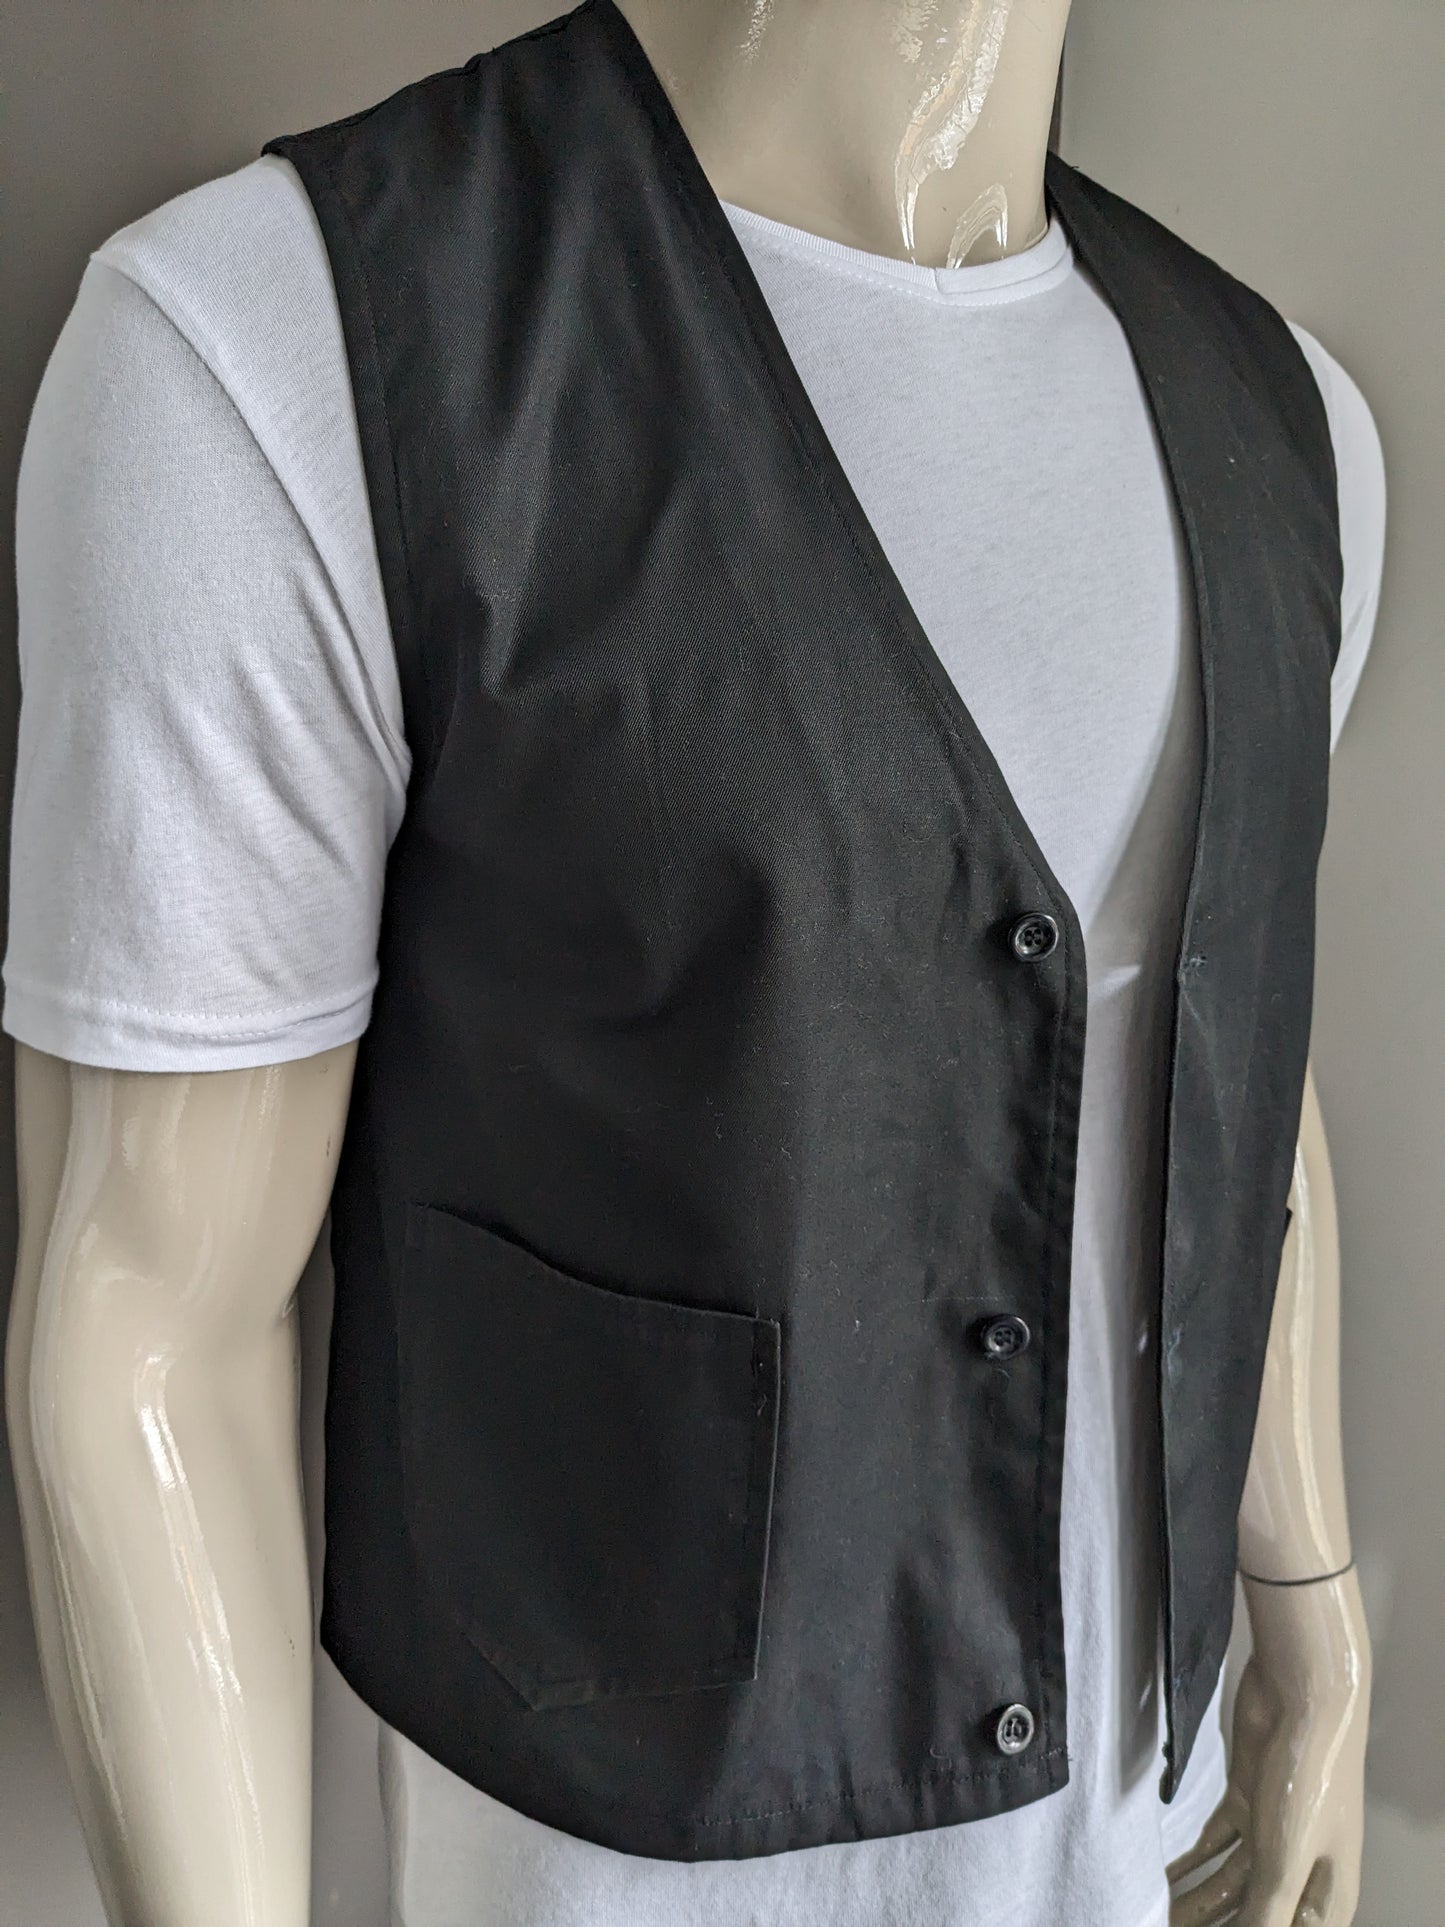 Gilet with bags. Black colored. Size M. #333.